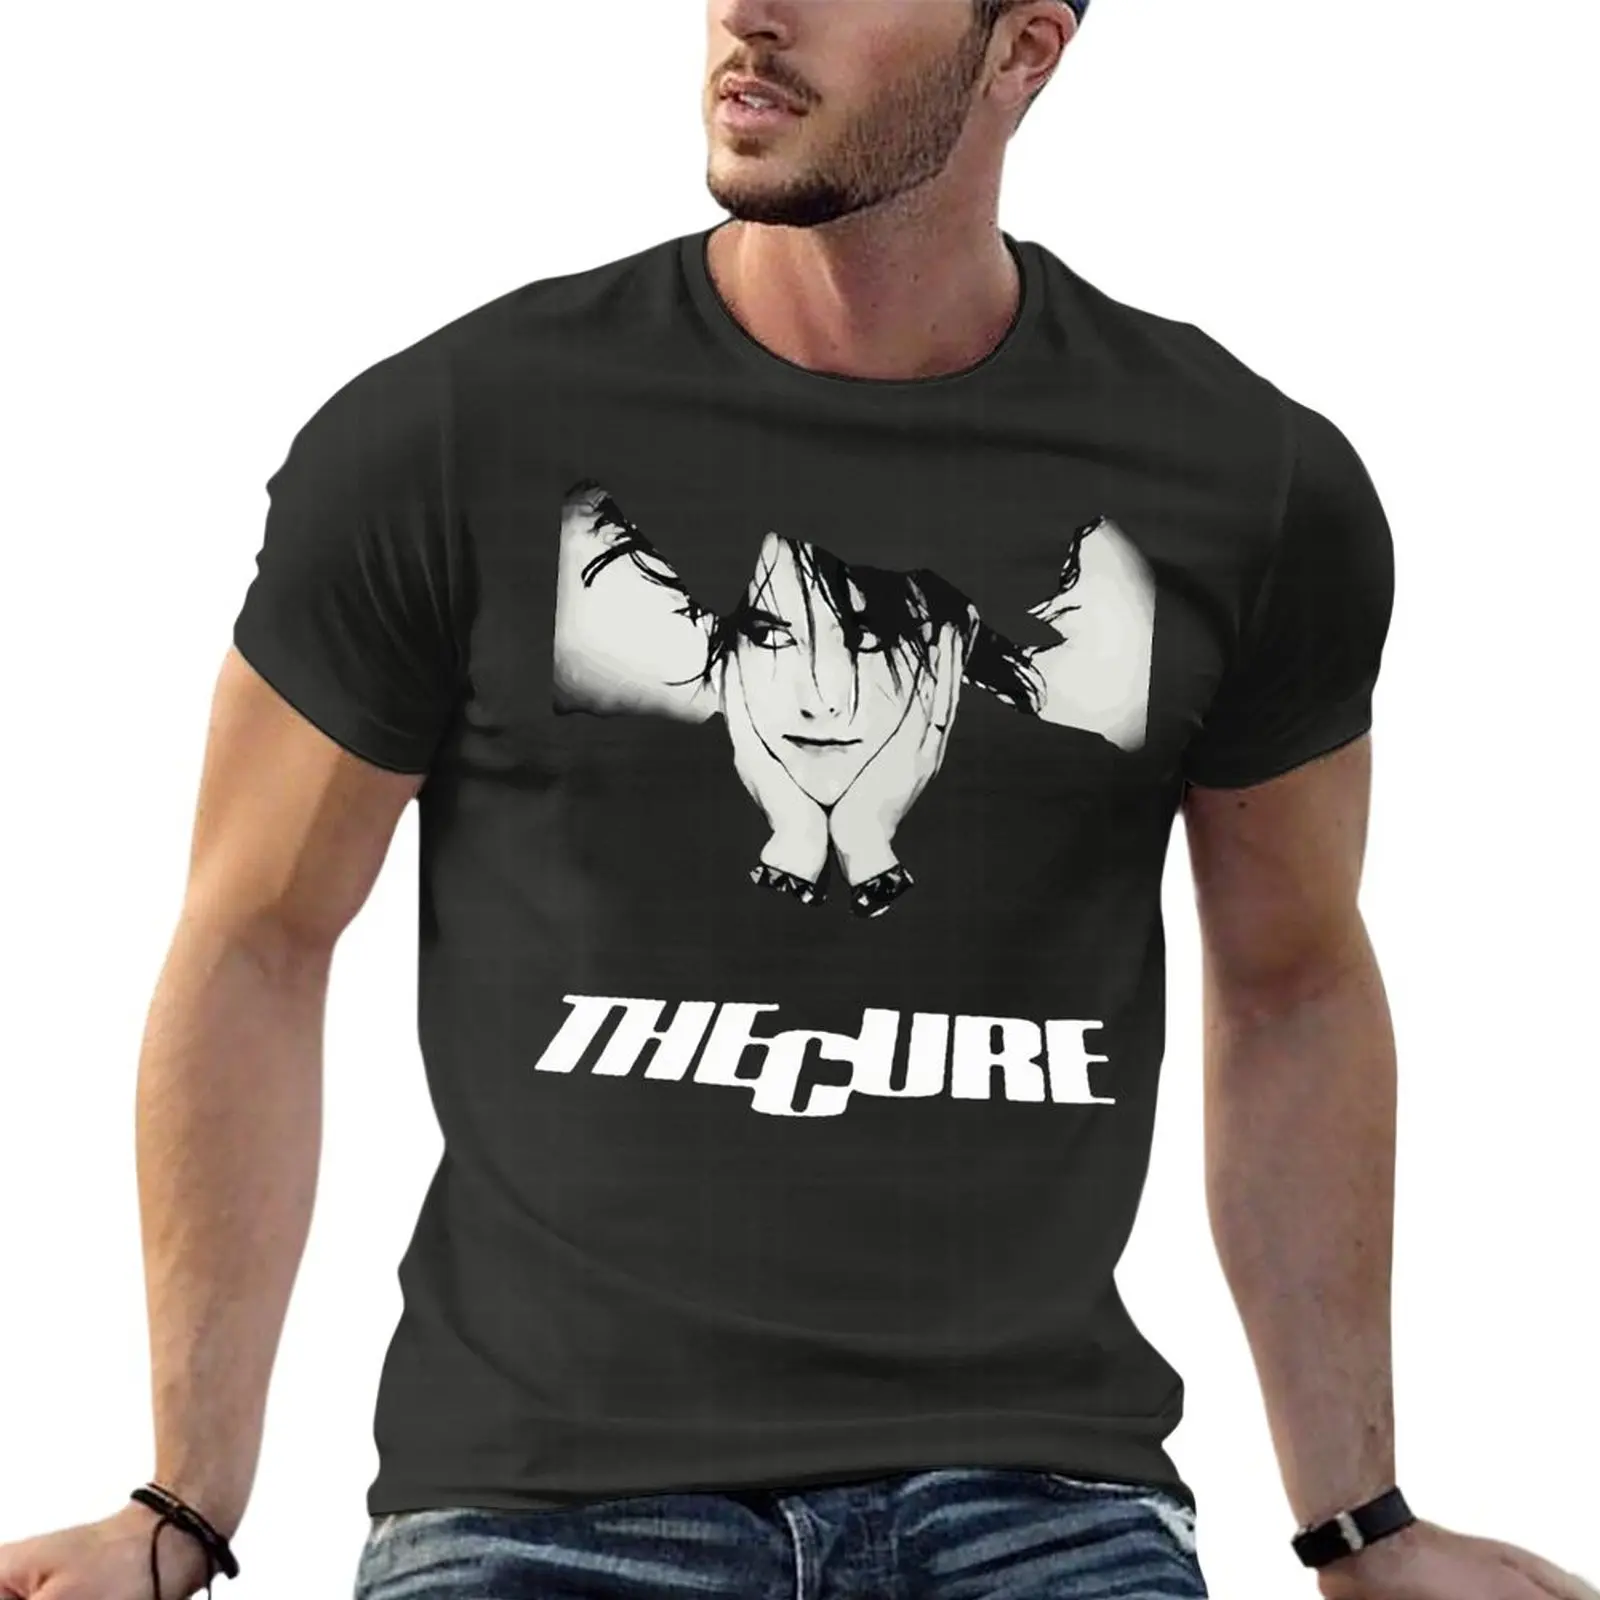 

The Cure Friday Im In Love Hard Rock Band Oversized T Shirt Fashion Mens Clothing Short Sleeve Streetwear Big Size Tops Tee